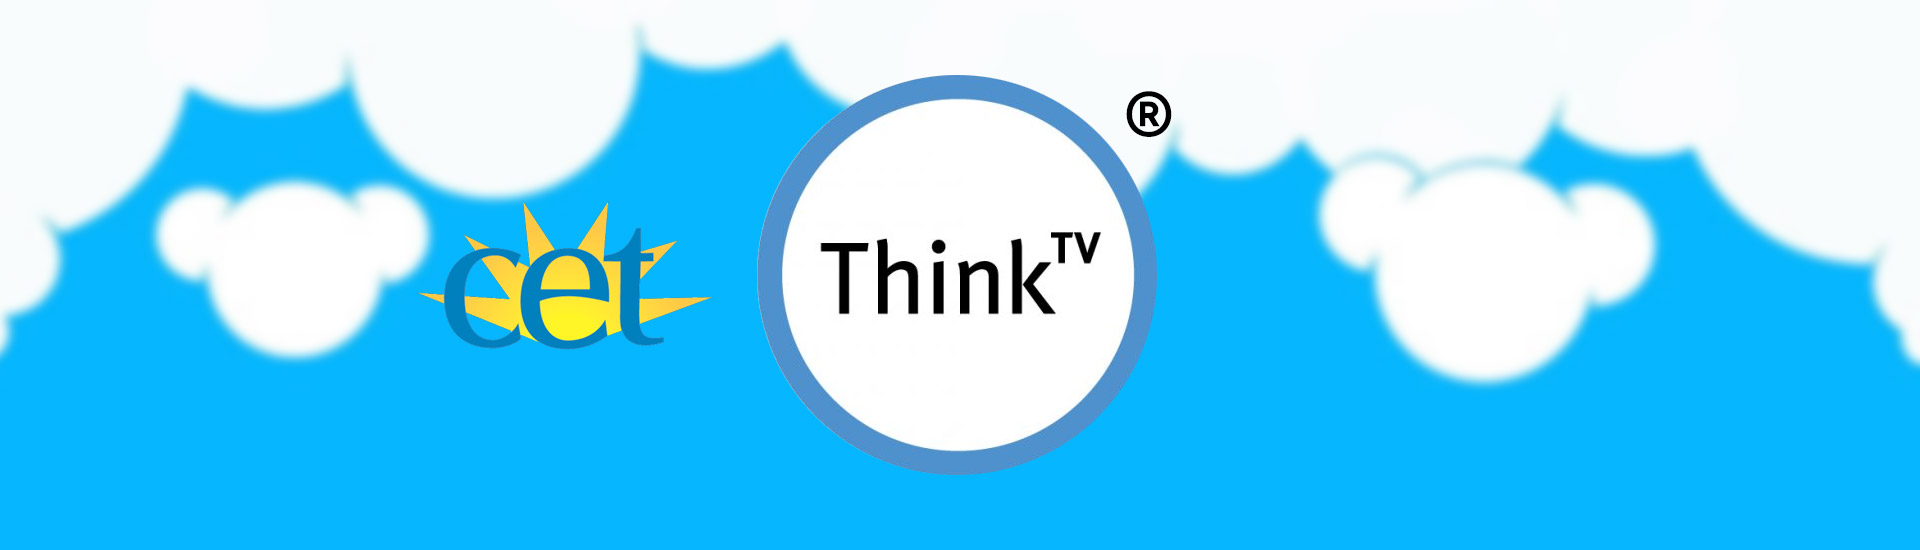 Image for Public Media Connect CET/ThinkTV